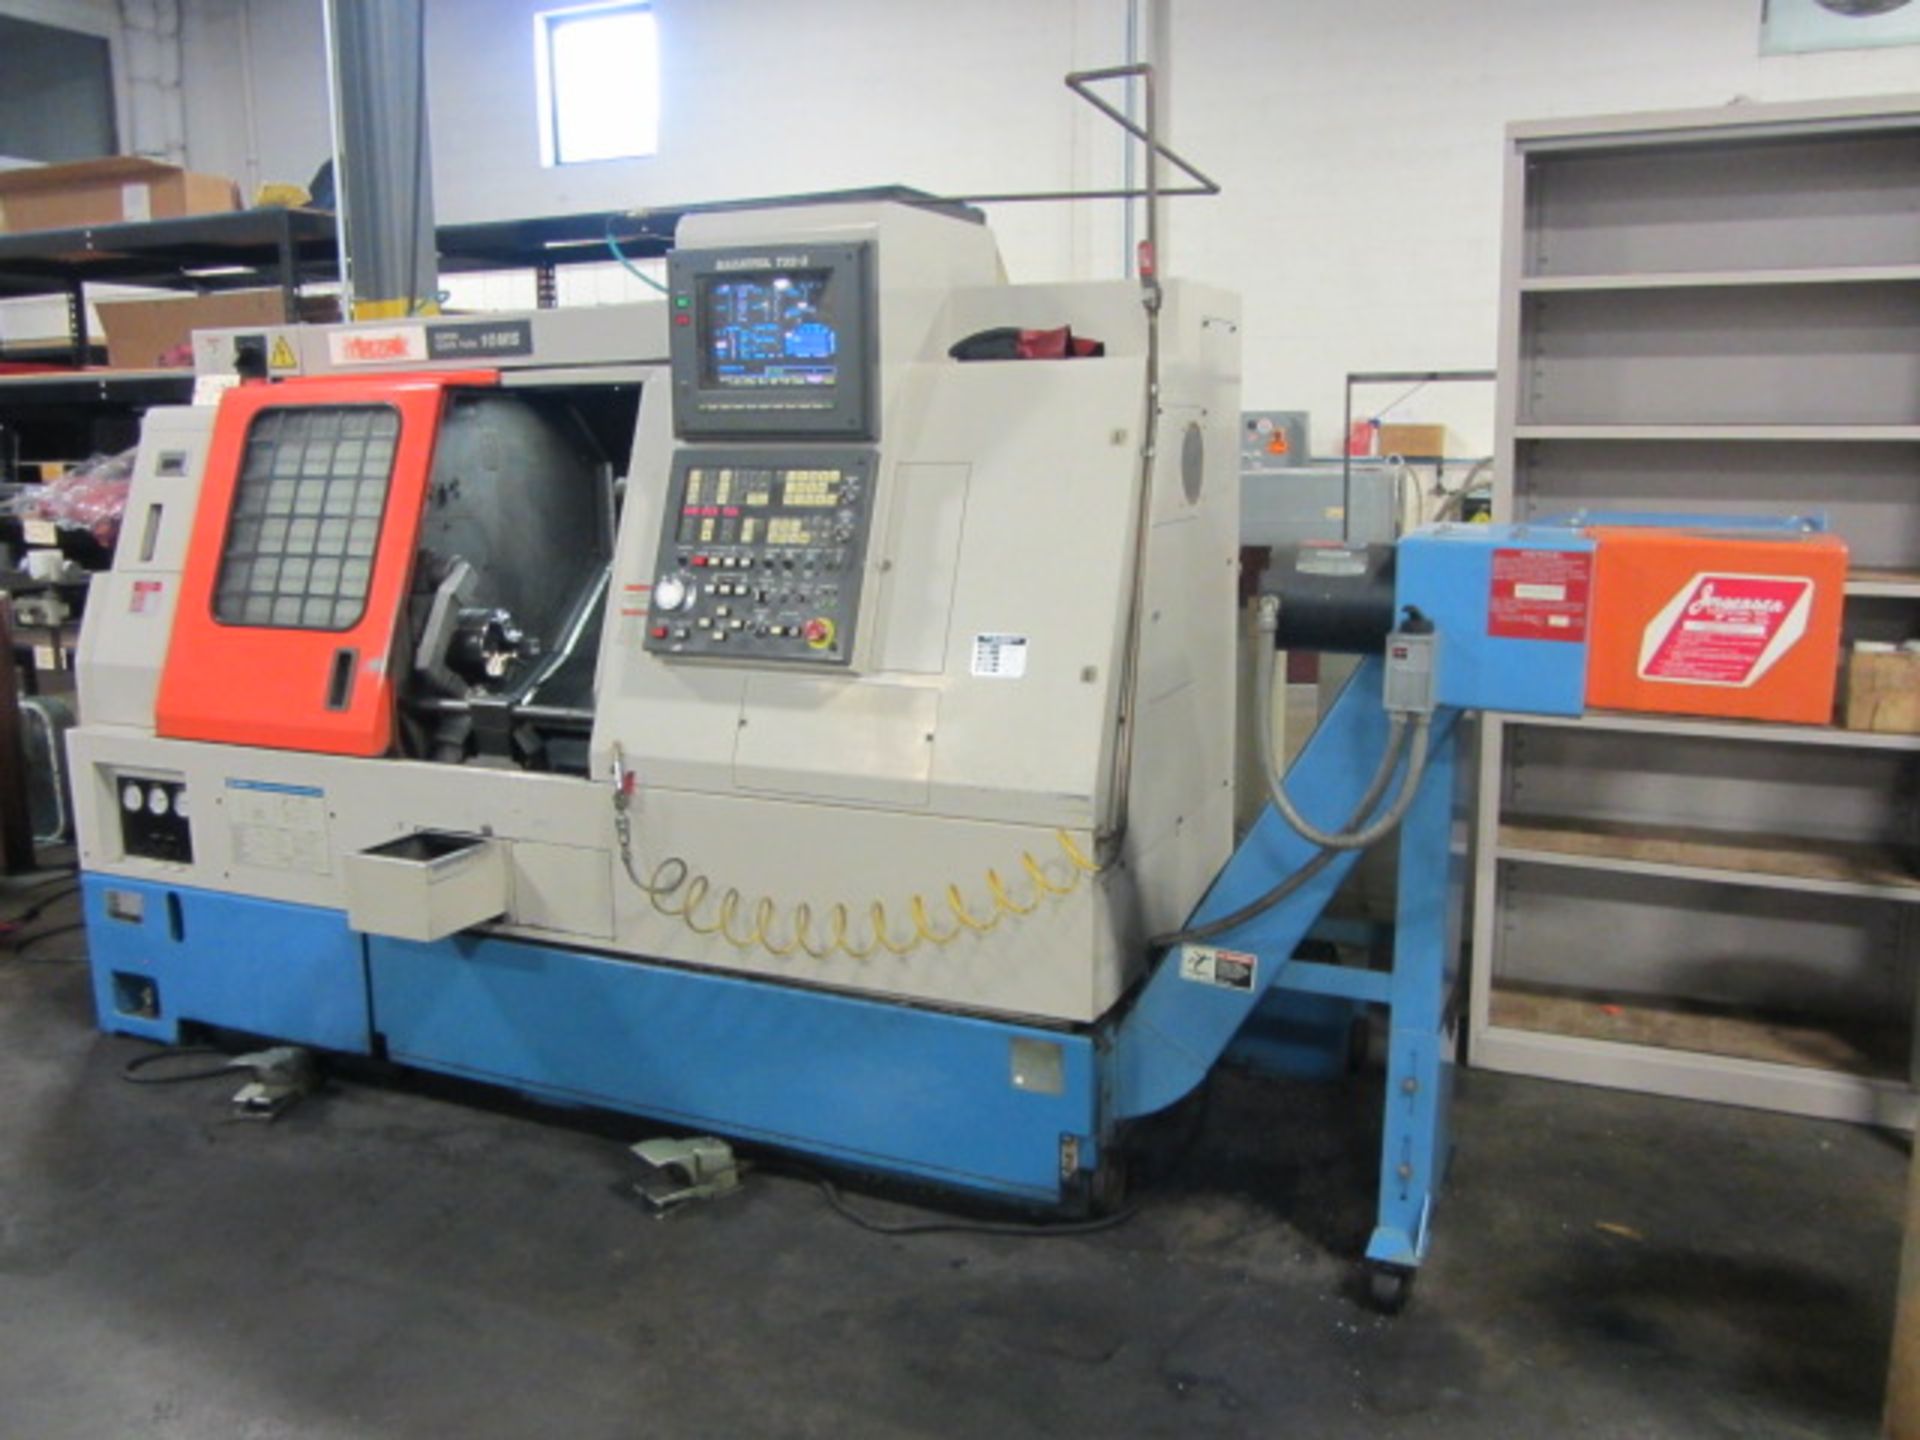 Mazak Super Quick Turn 10MS CNC Turning Center with Sub-Spindle, Milling, 6'' 3-Jaw Power Chuck, - Image 6 of 8